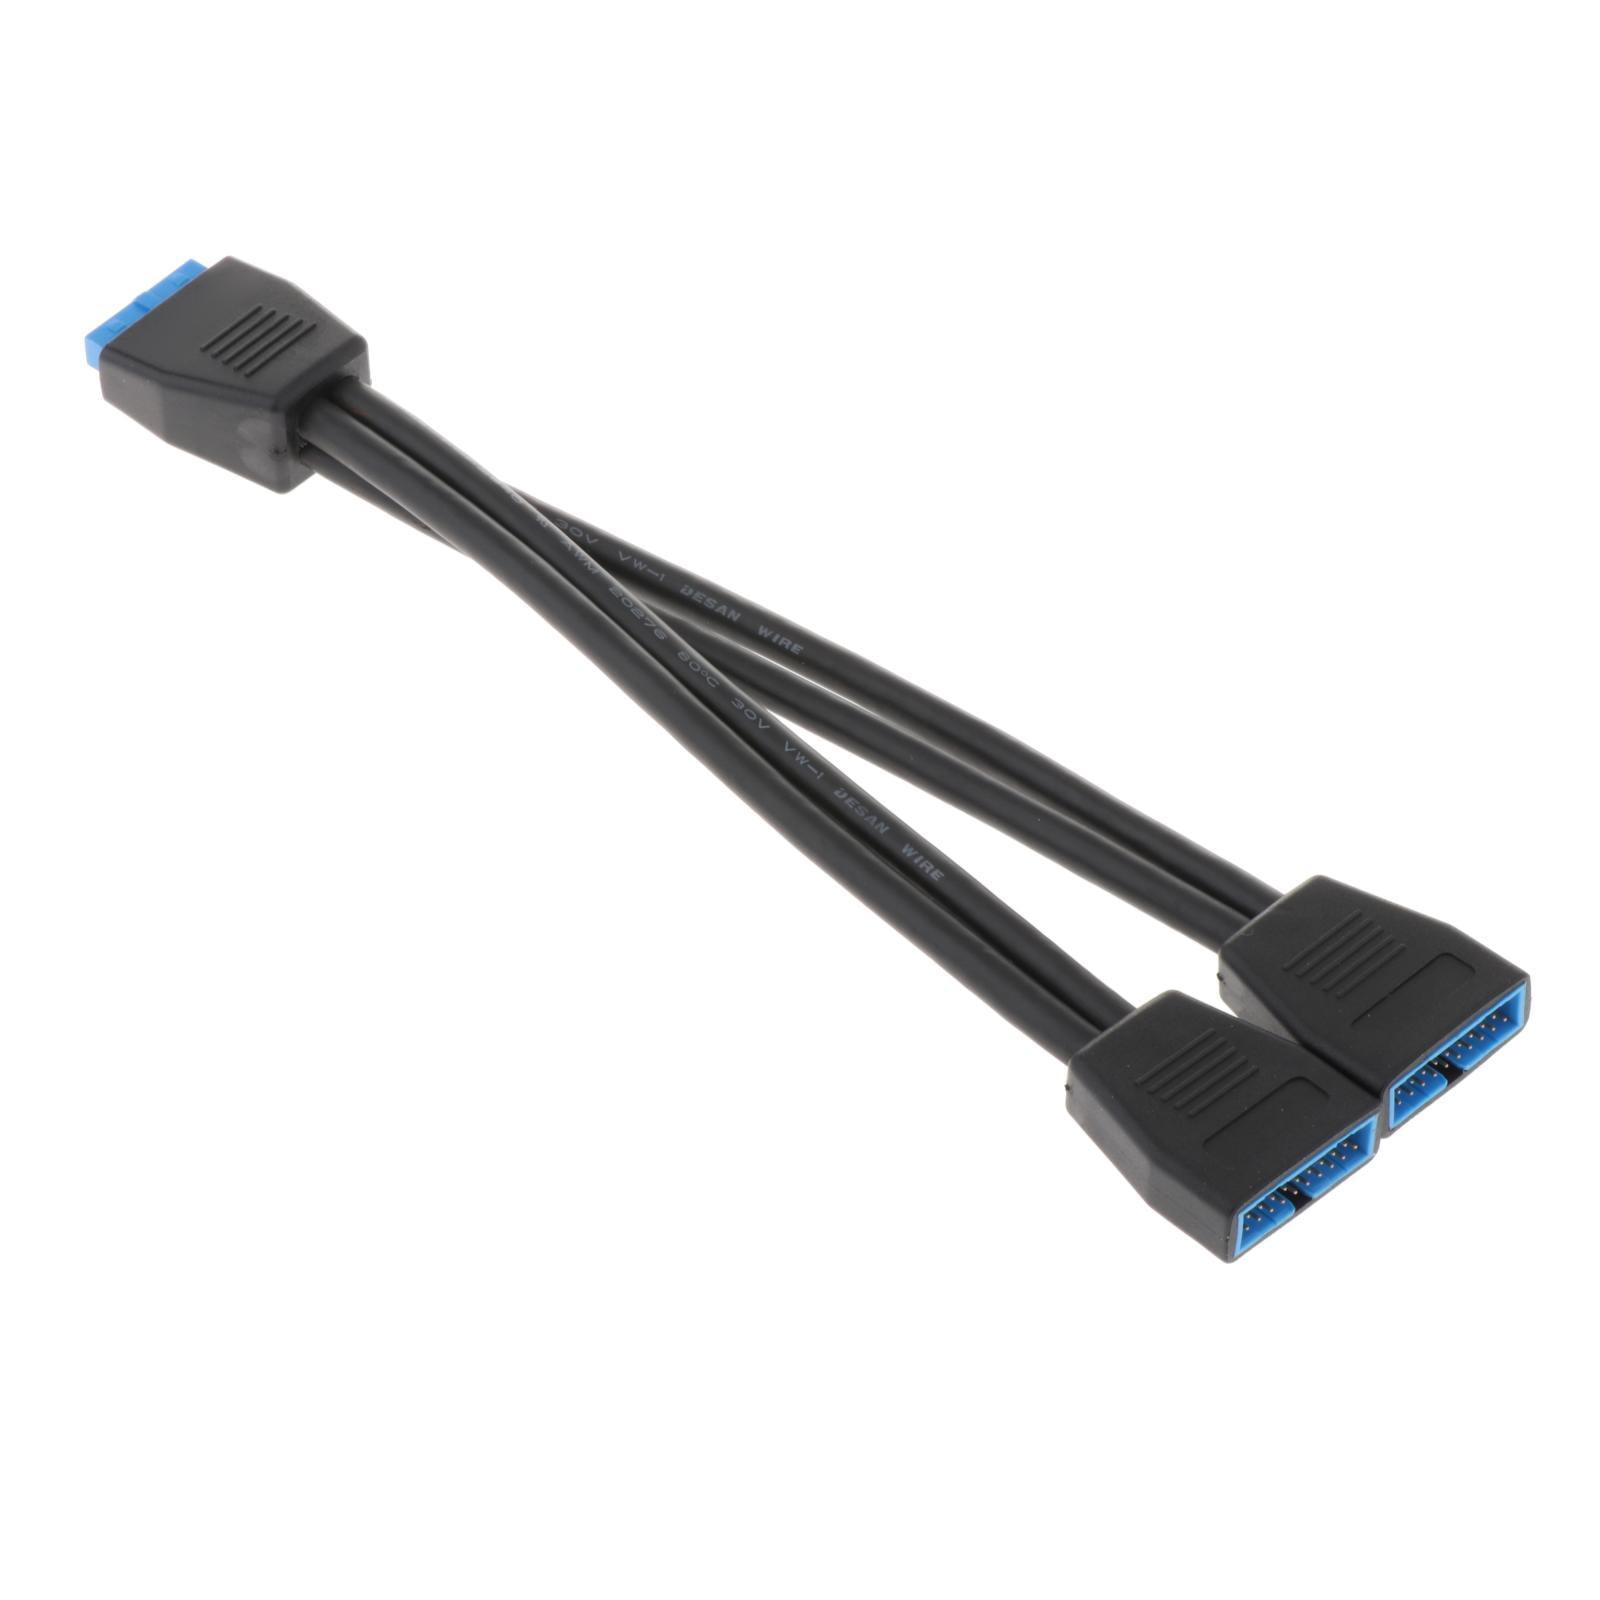 USB3.0 Header Fan Splitter Cable 1 to 2 USB Cable for Motherboard A 200mm - Walmart.com